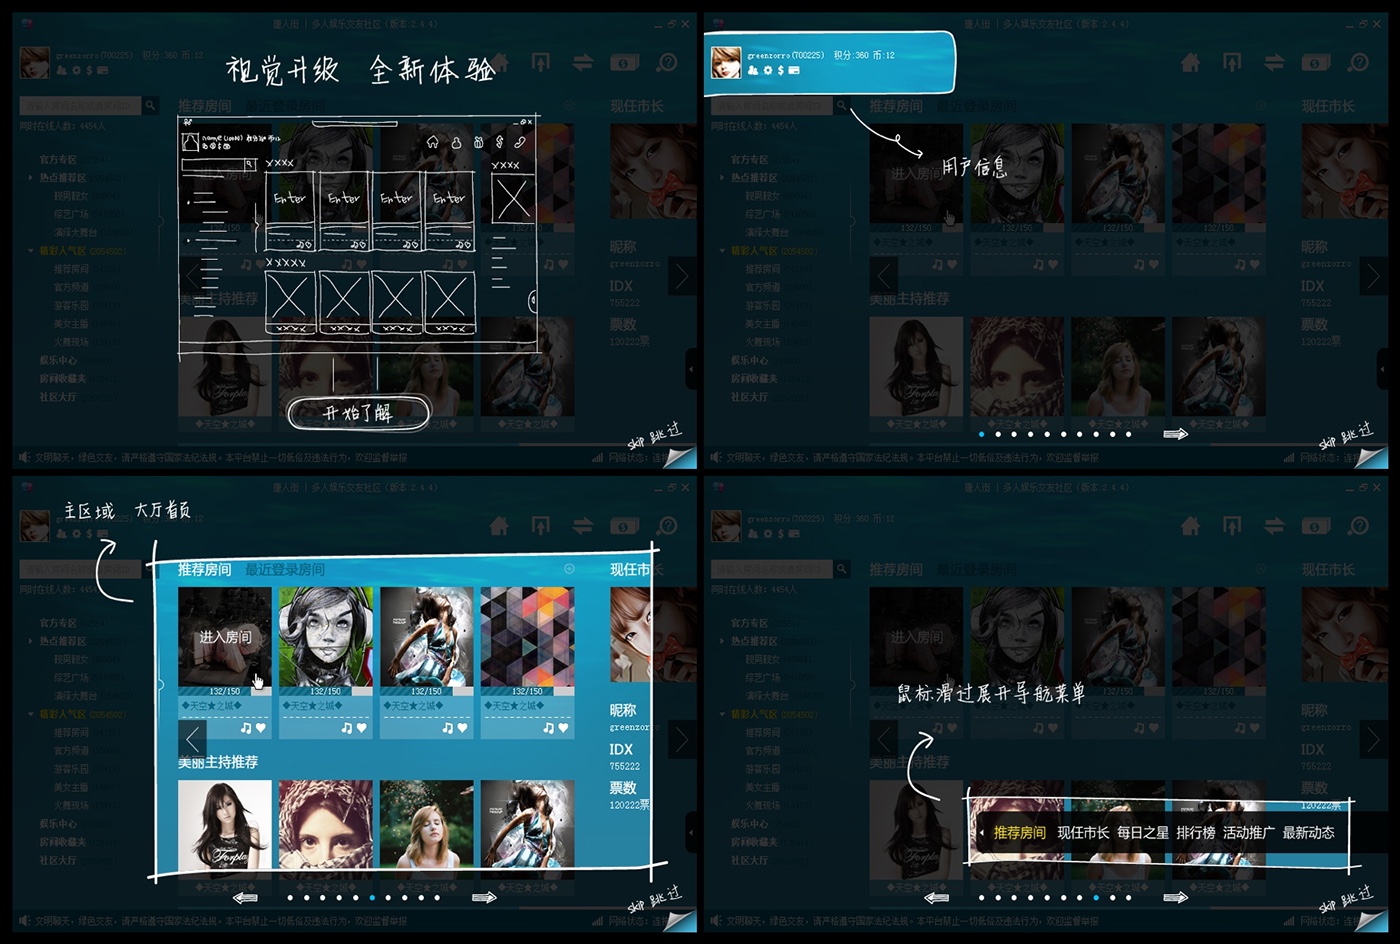 pc app live show video chat room redesign